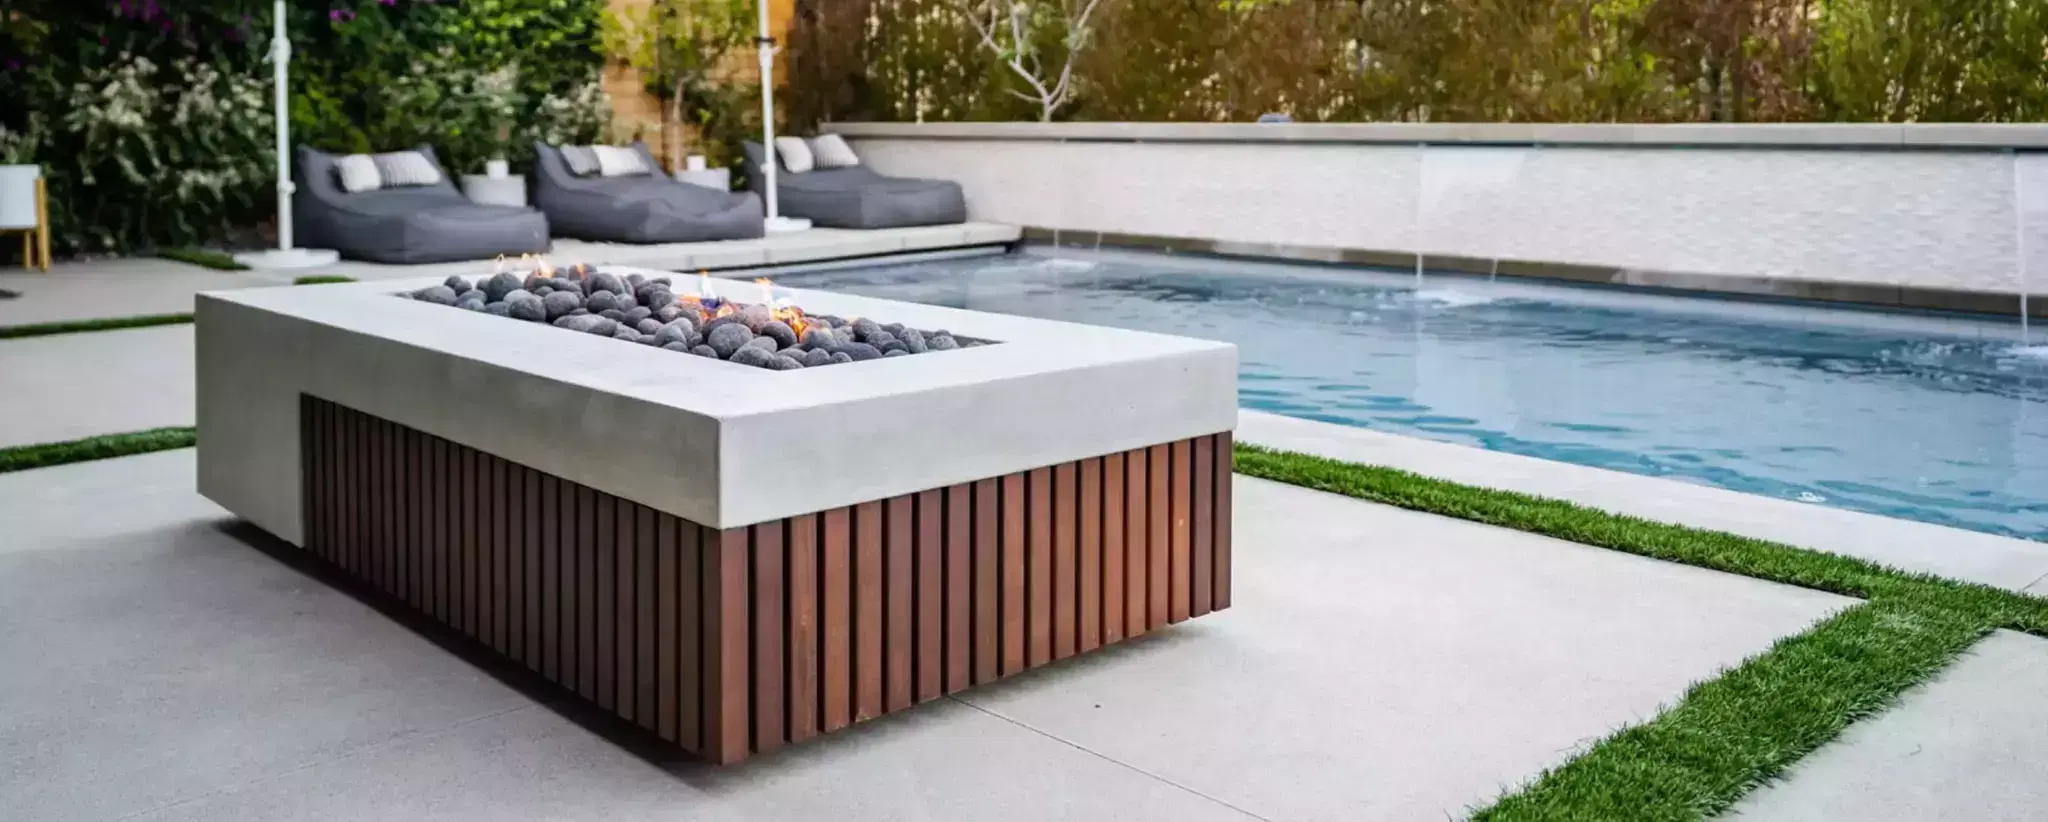 Everything you need to know before buying a fire pit